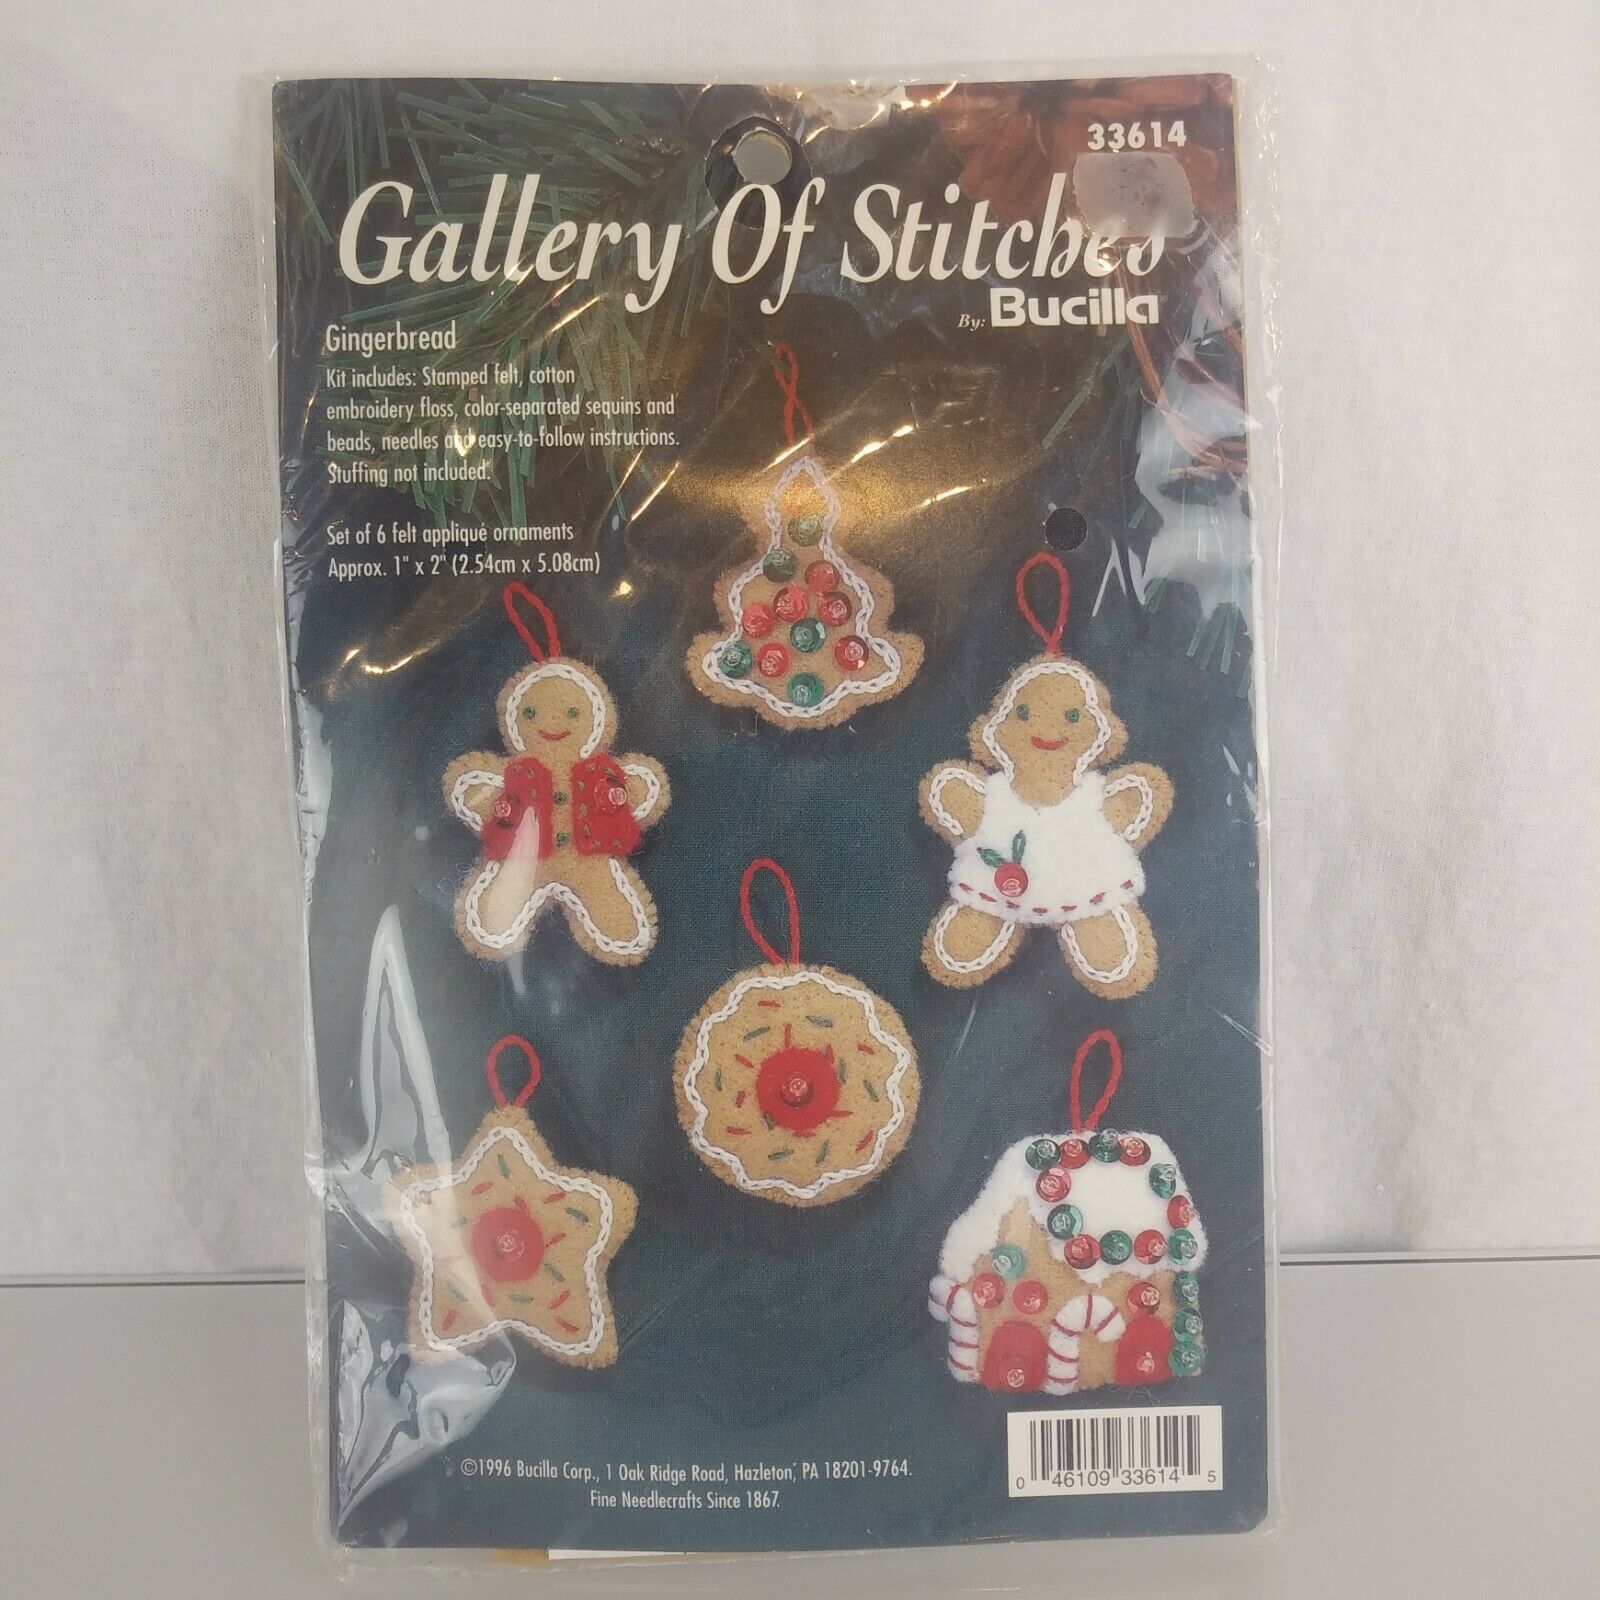 Vintage Bucilla Gallery of Stitches and 50 similar items